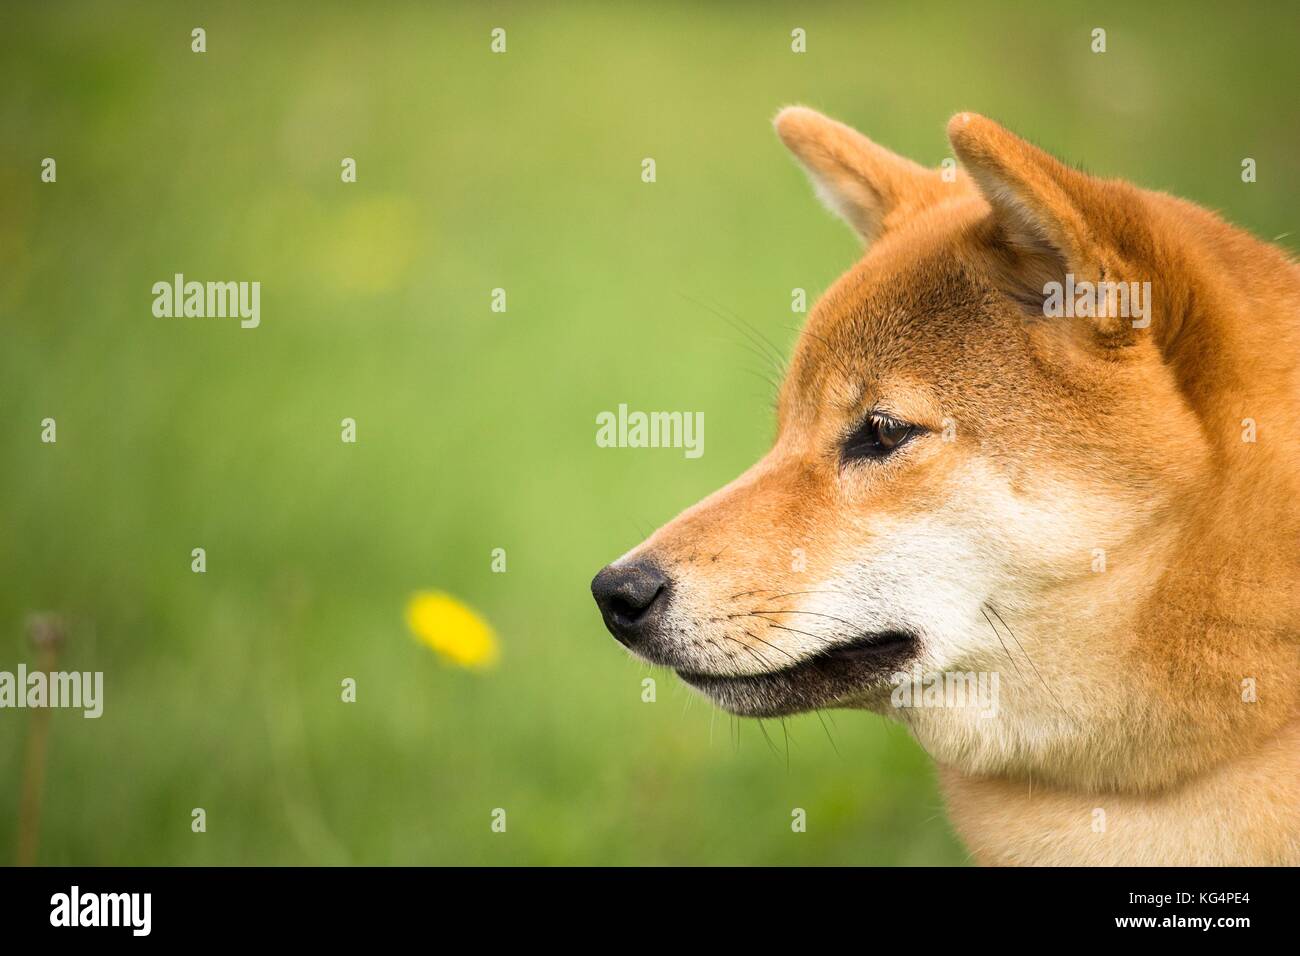 a portrait of the head of the Japanese dog shiba inu with an attentive look Stock Photo